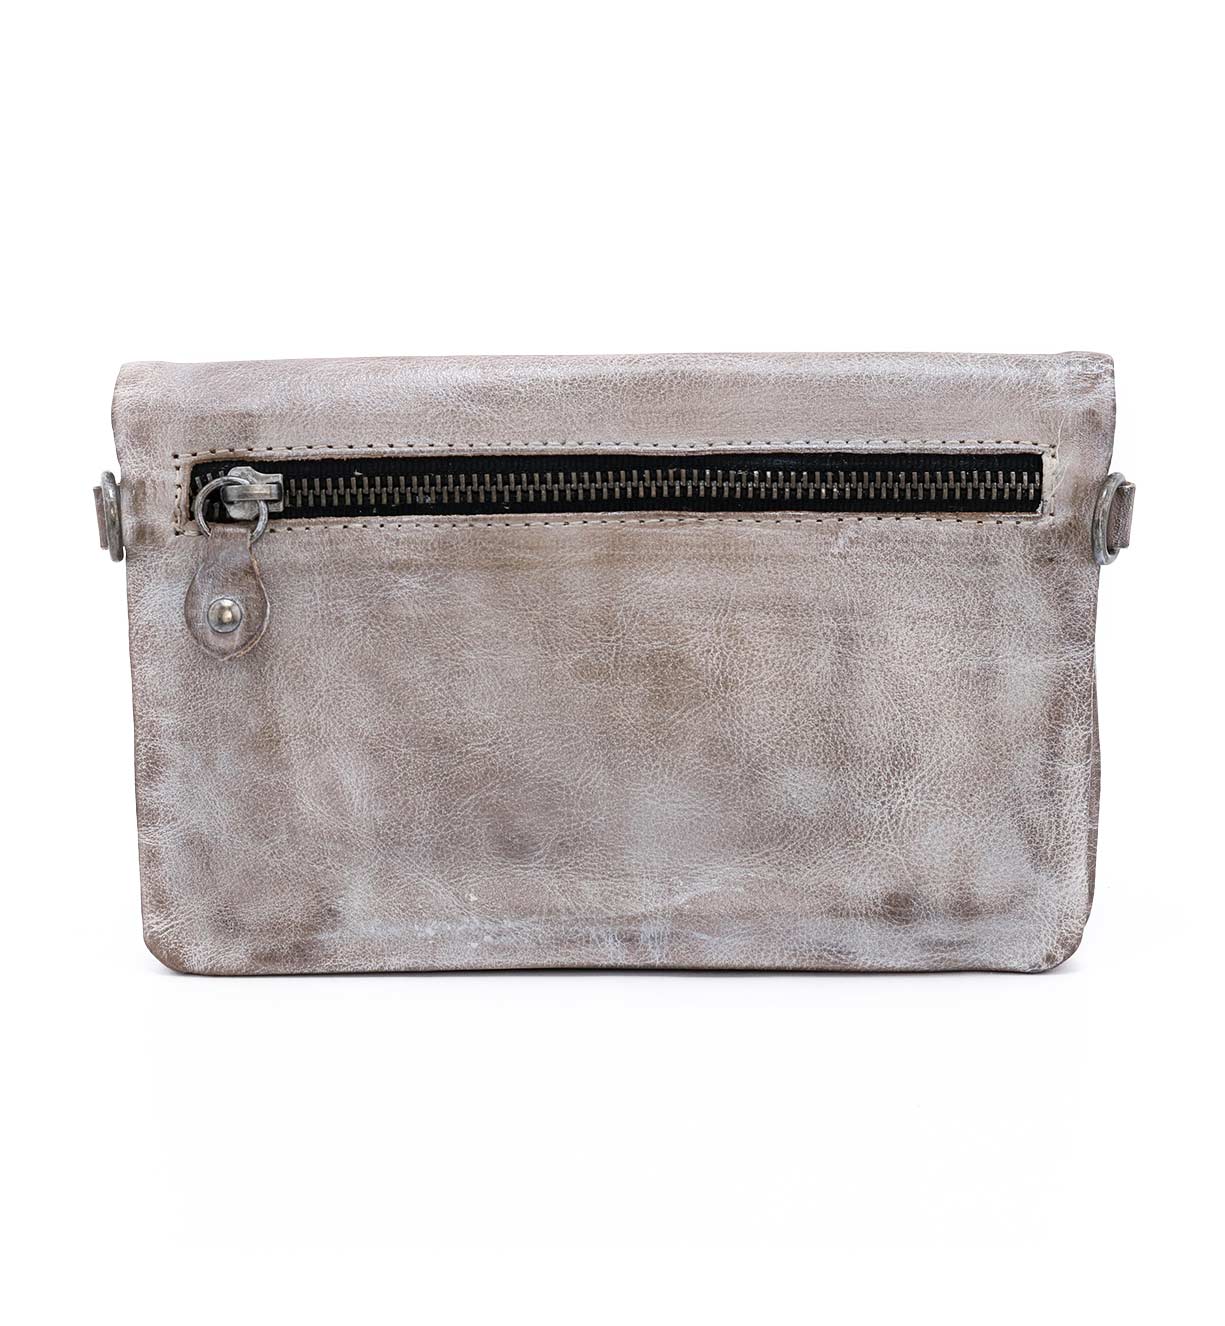 A grey leather Cadence clutch bag with a zipper by Bed Stu.